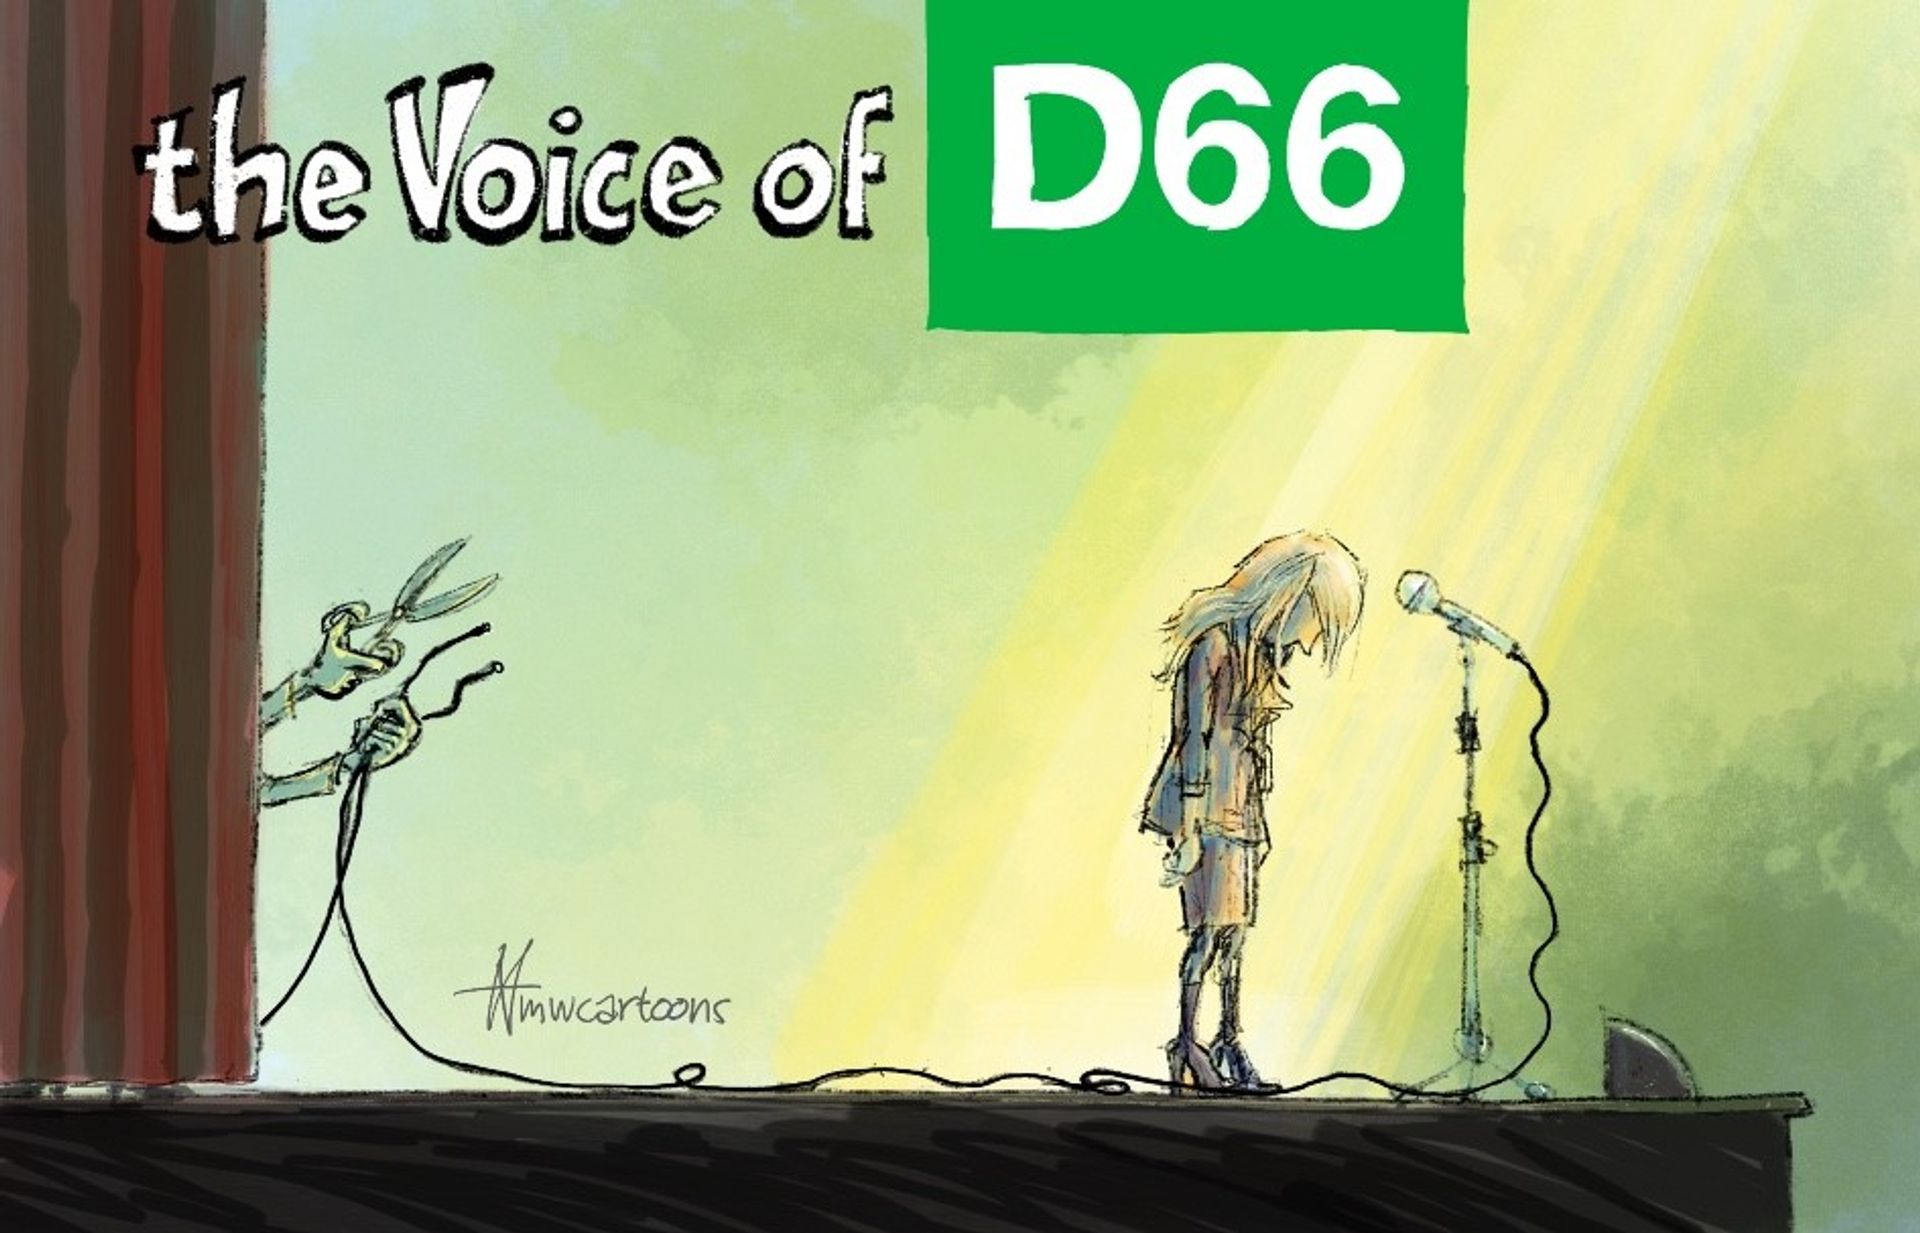 thevoiceofd66